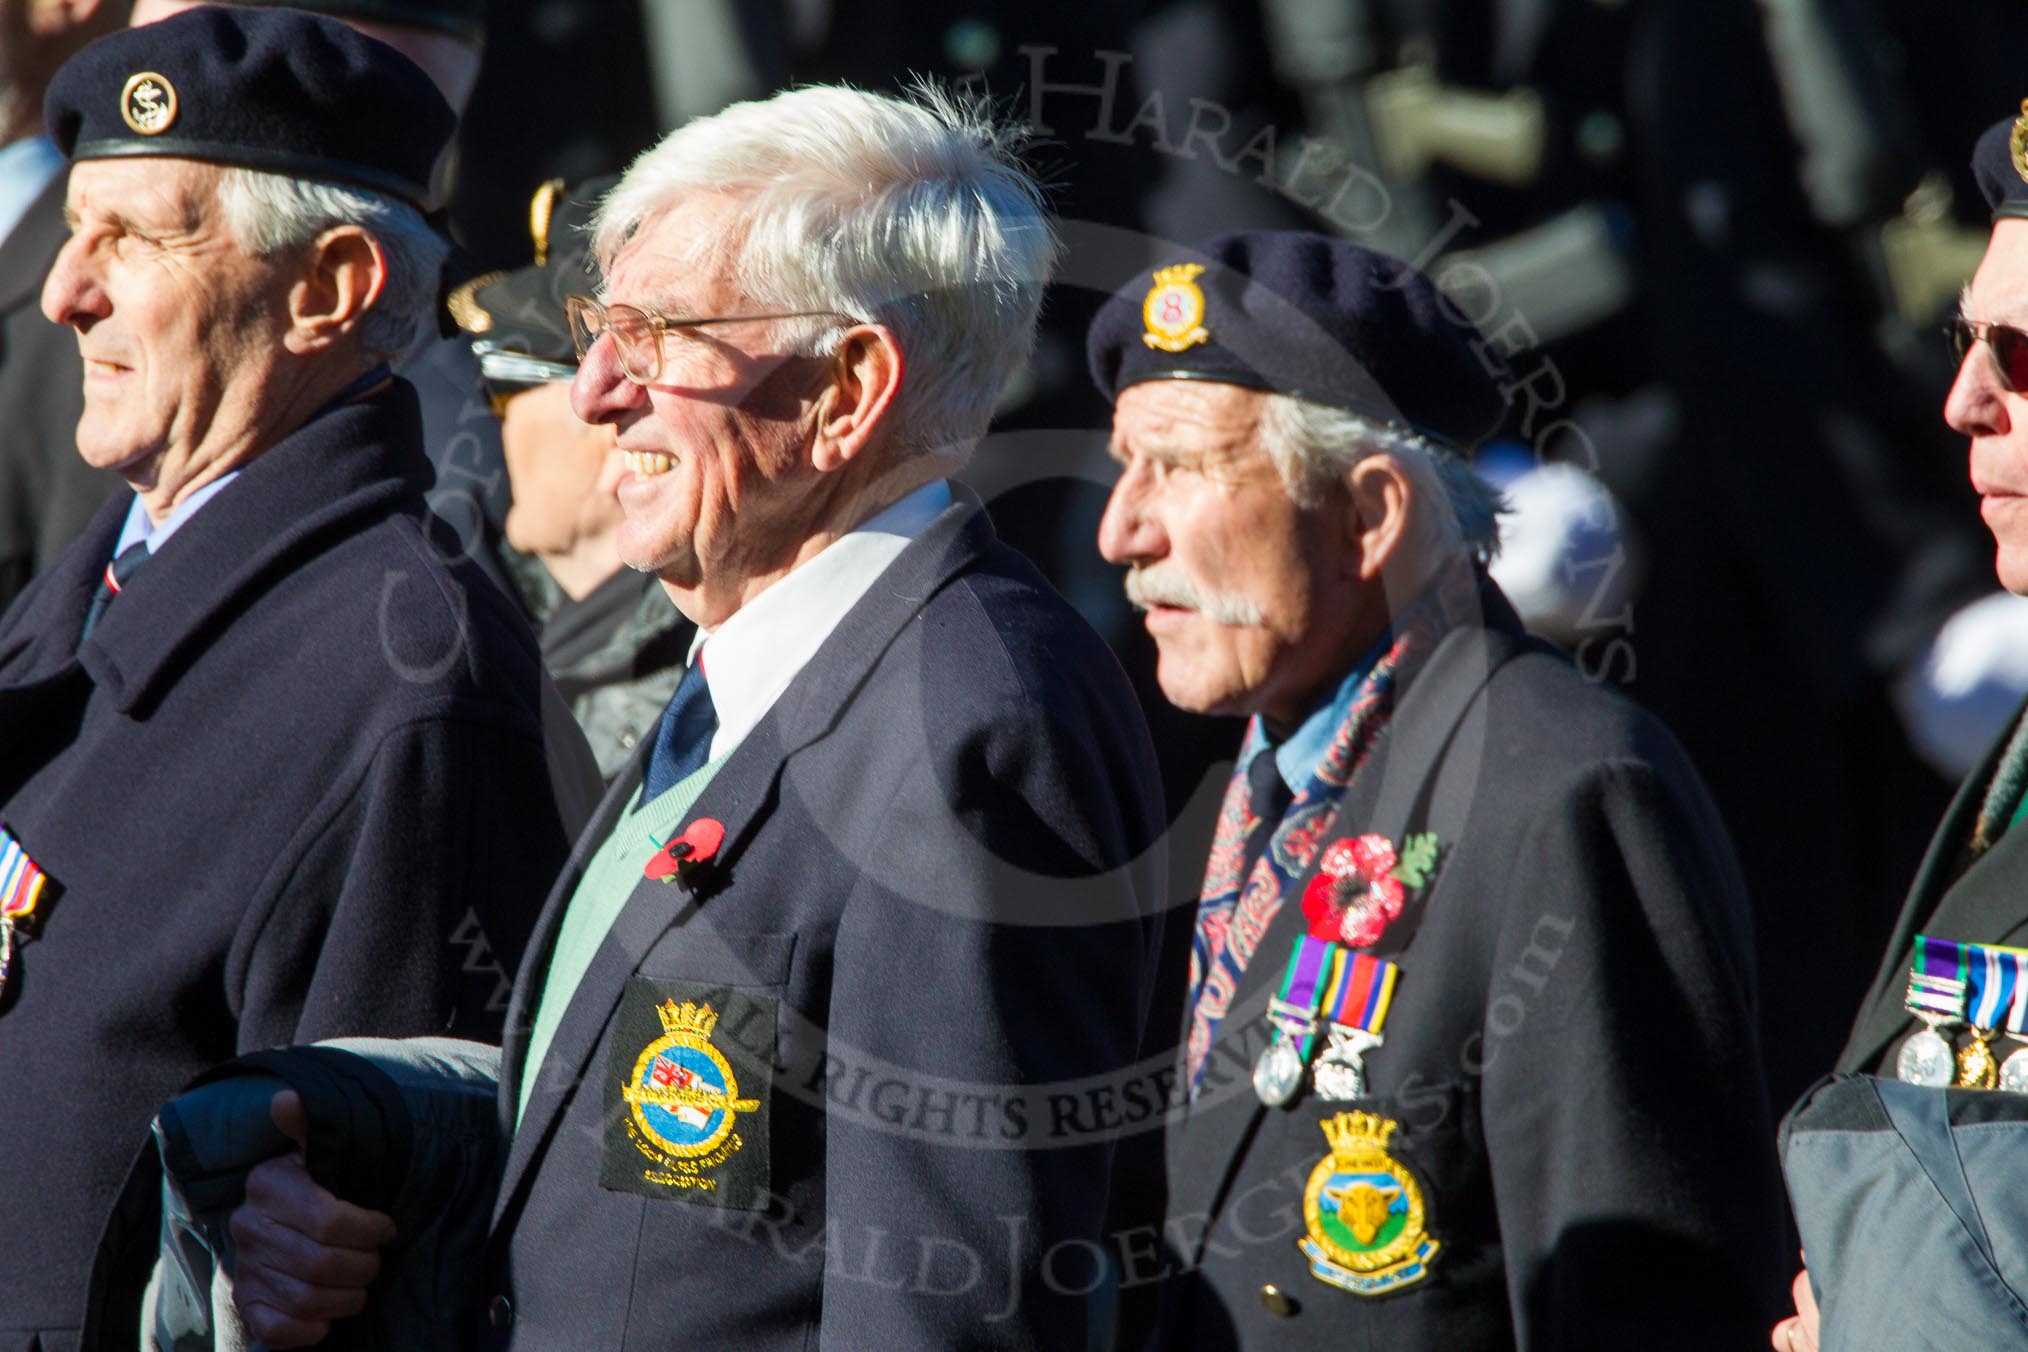 Remembrance Sunday Cenotaph March Past 2013: E21 - HMS Ganges Association..
Press stand opposite the Foreign Office building, Whitehall, London SW1,
London,
Greater London,
United Kingdom,
on 10 November 2013 at 11:46, image #510